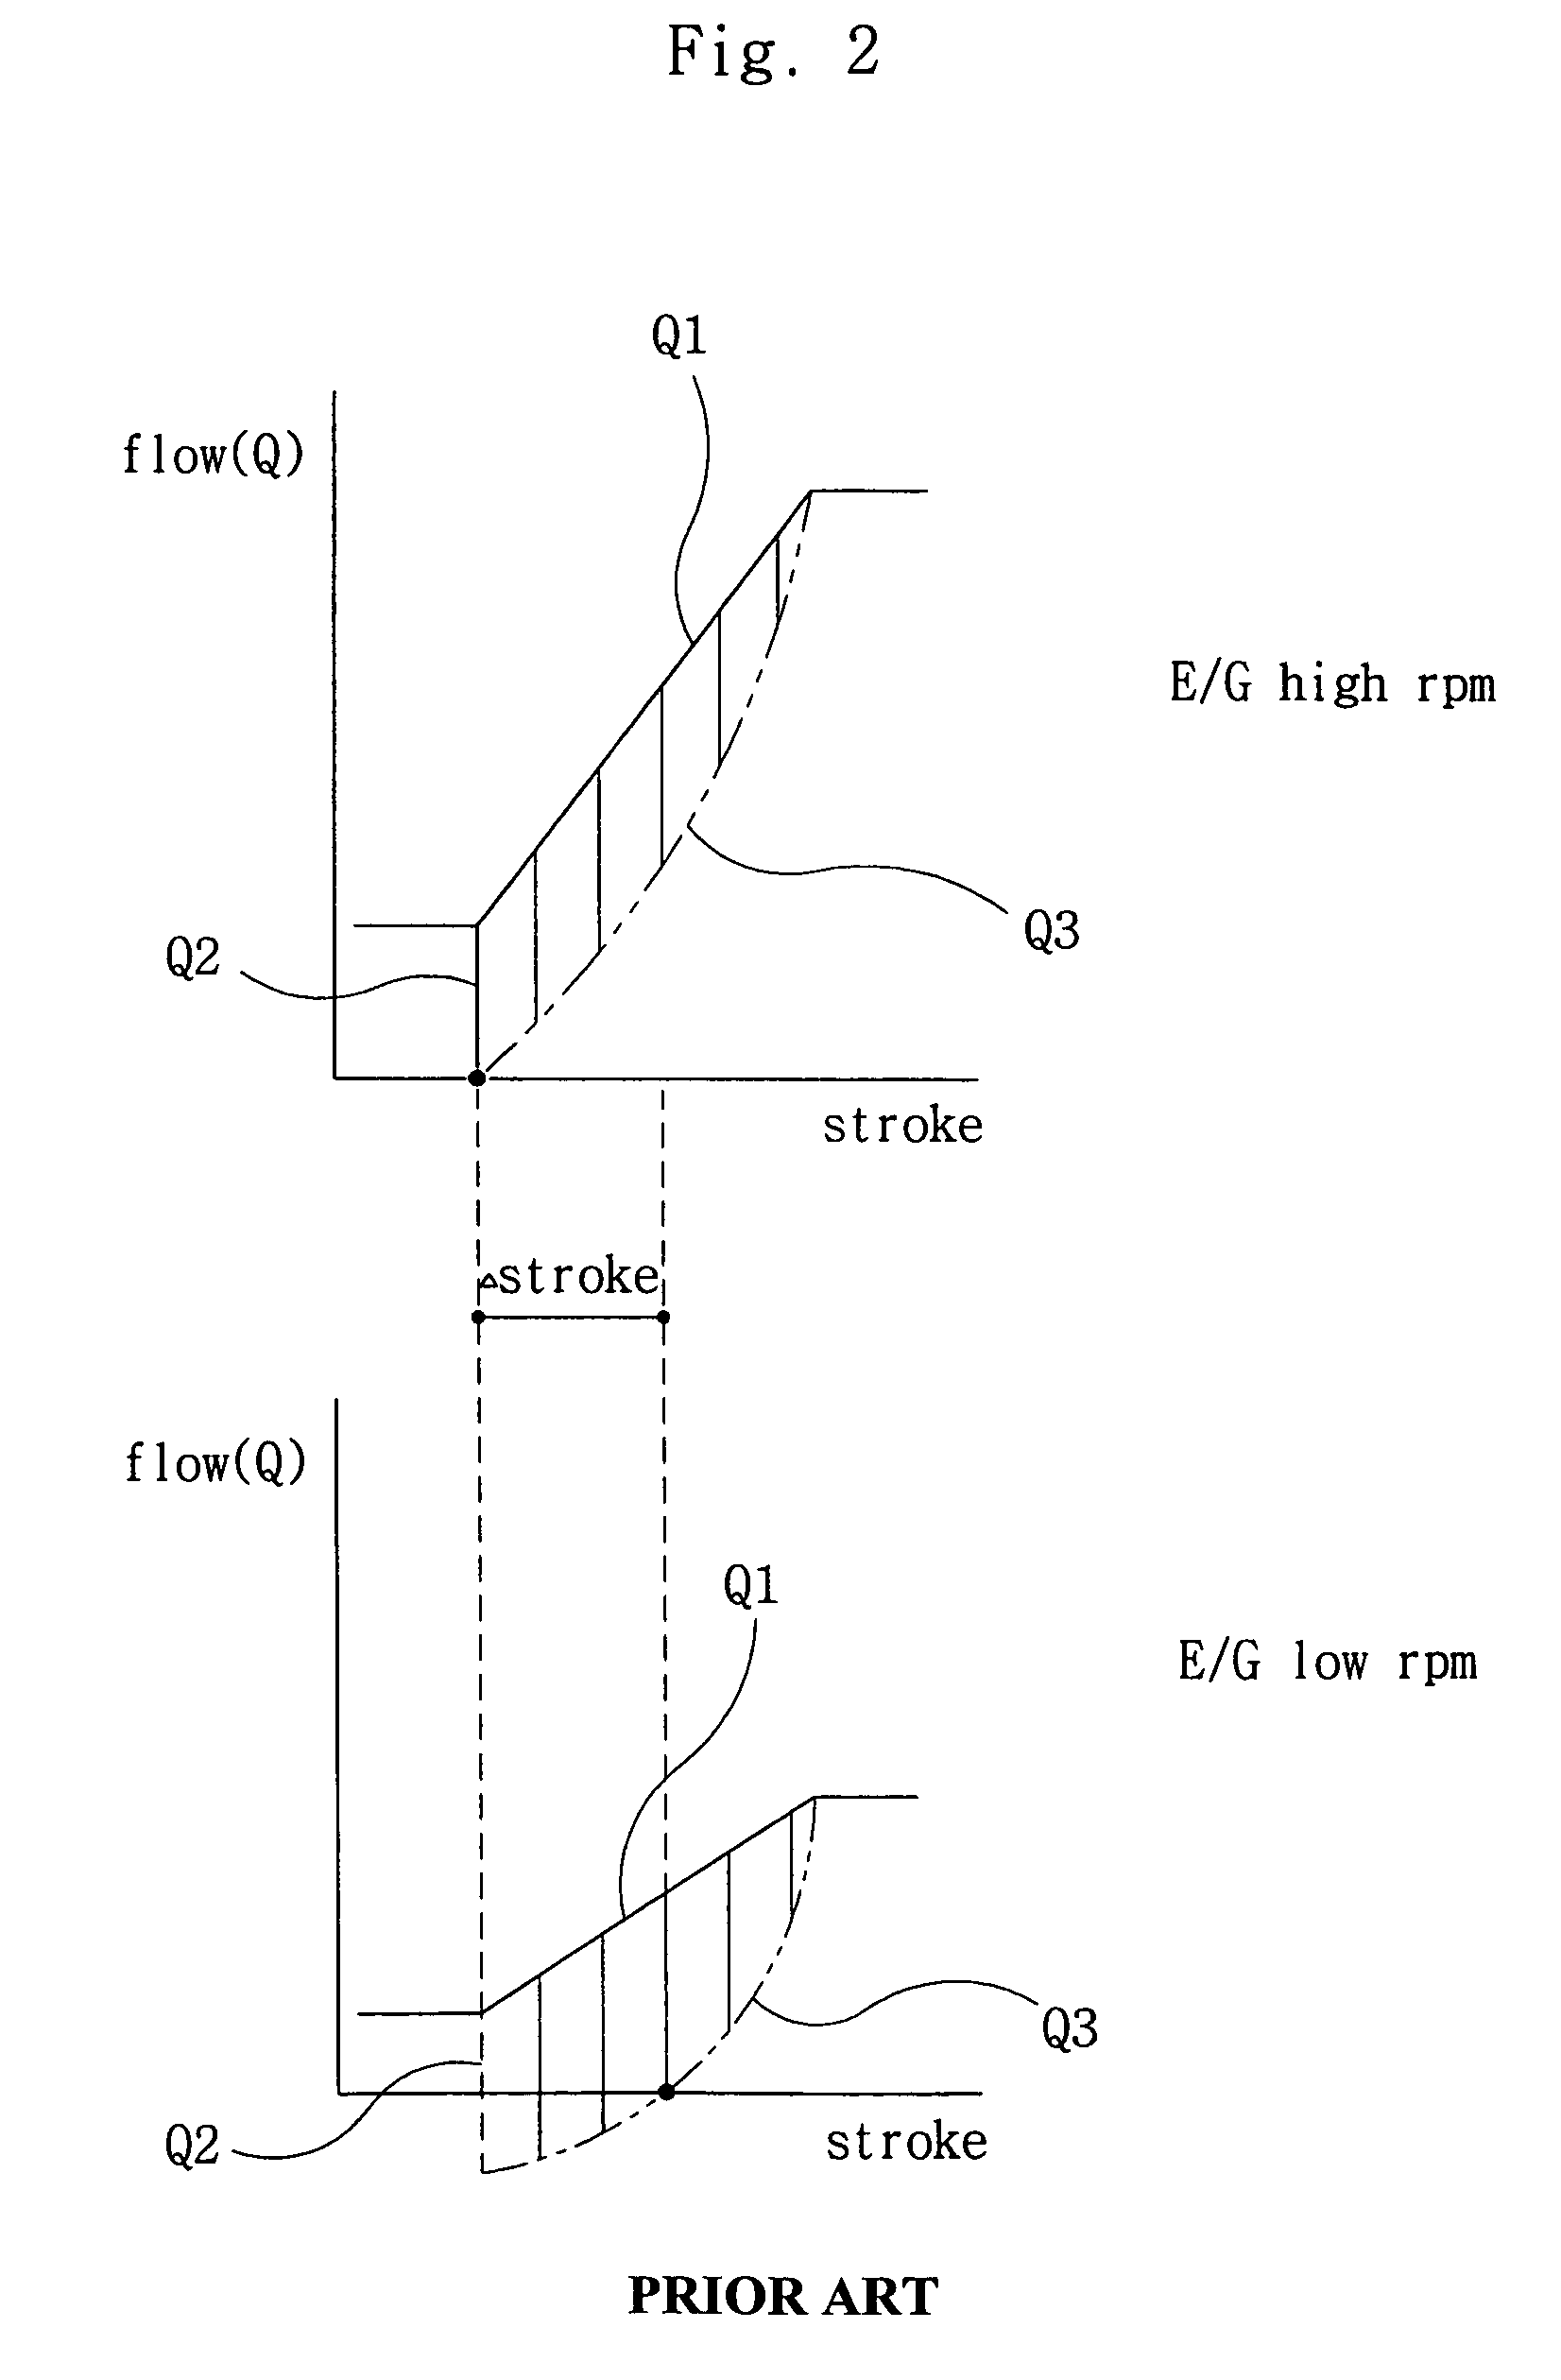 Circuit for controlling discharge amount of hydraulic pump